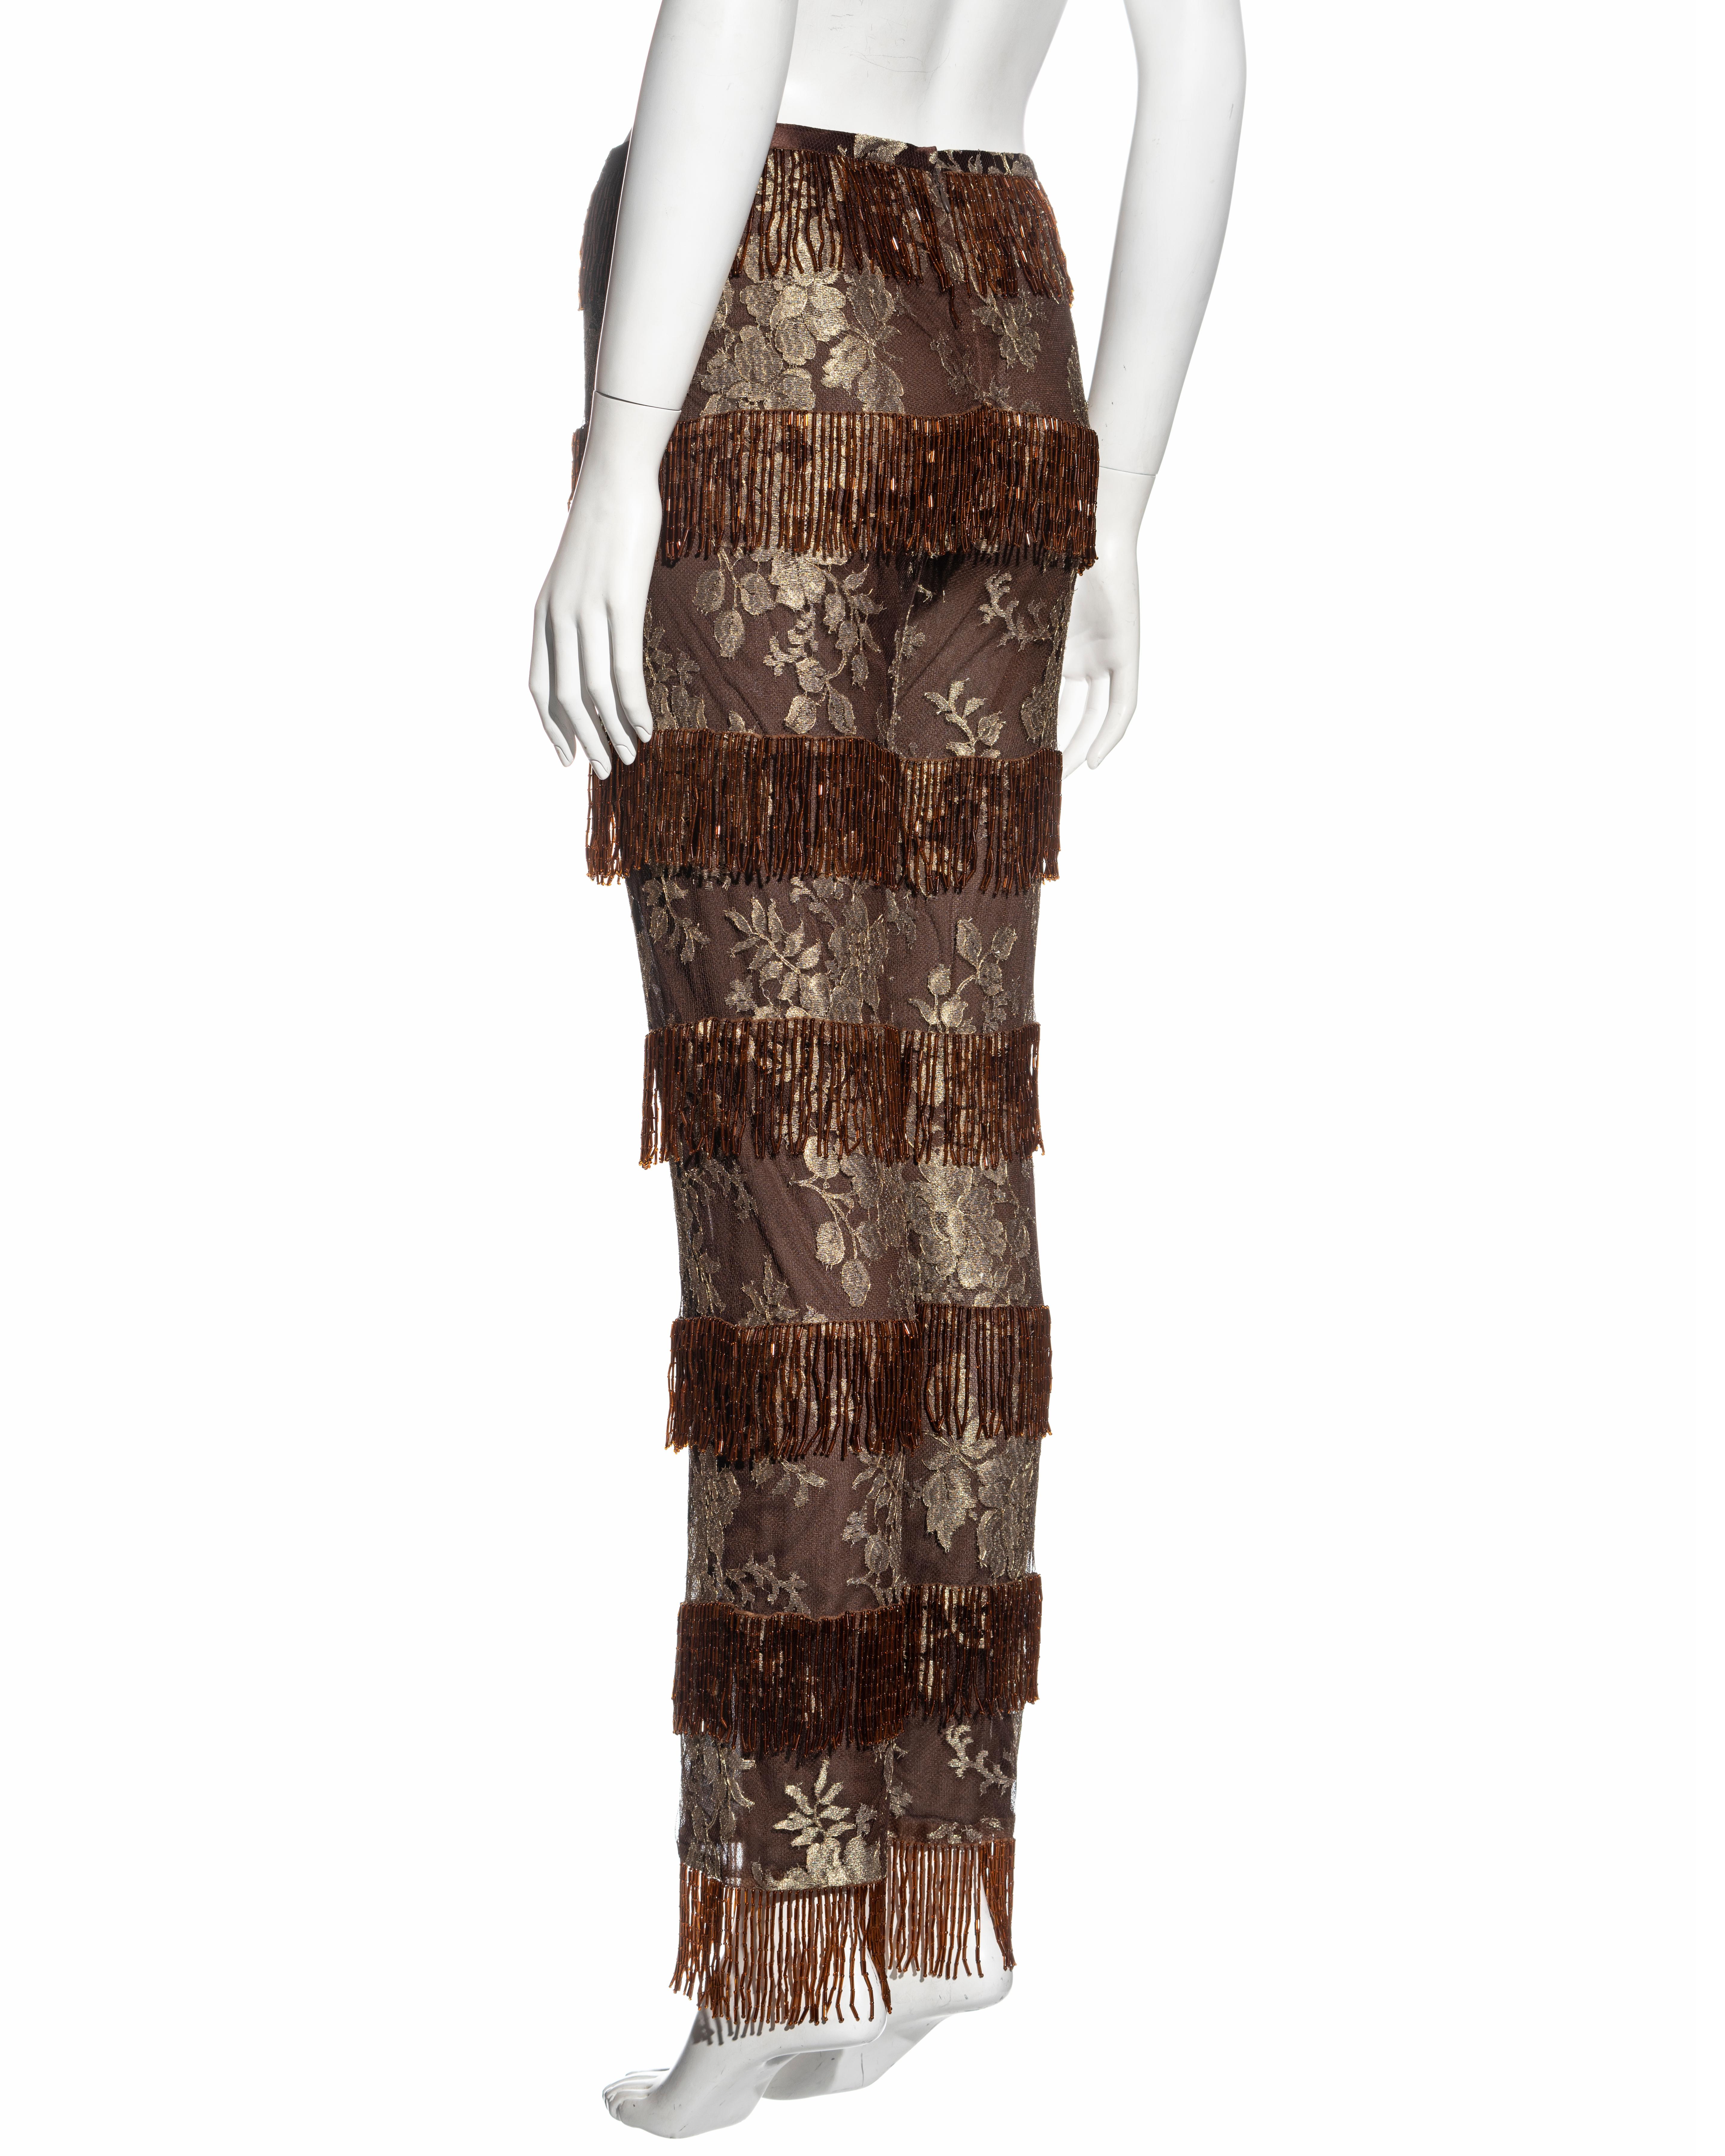 Women's Dolce & Gabbana metallic gold and copper lace beaded fringe pants, ss 2000 For Sale